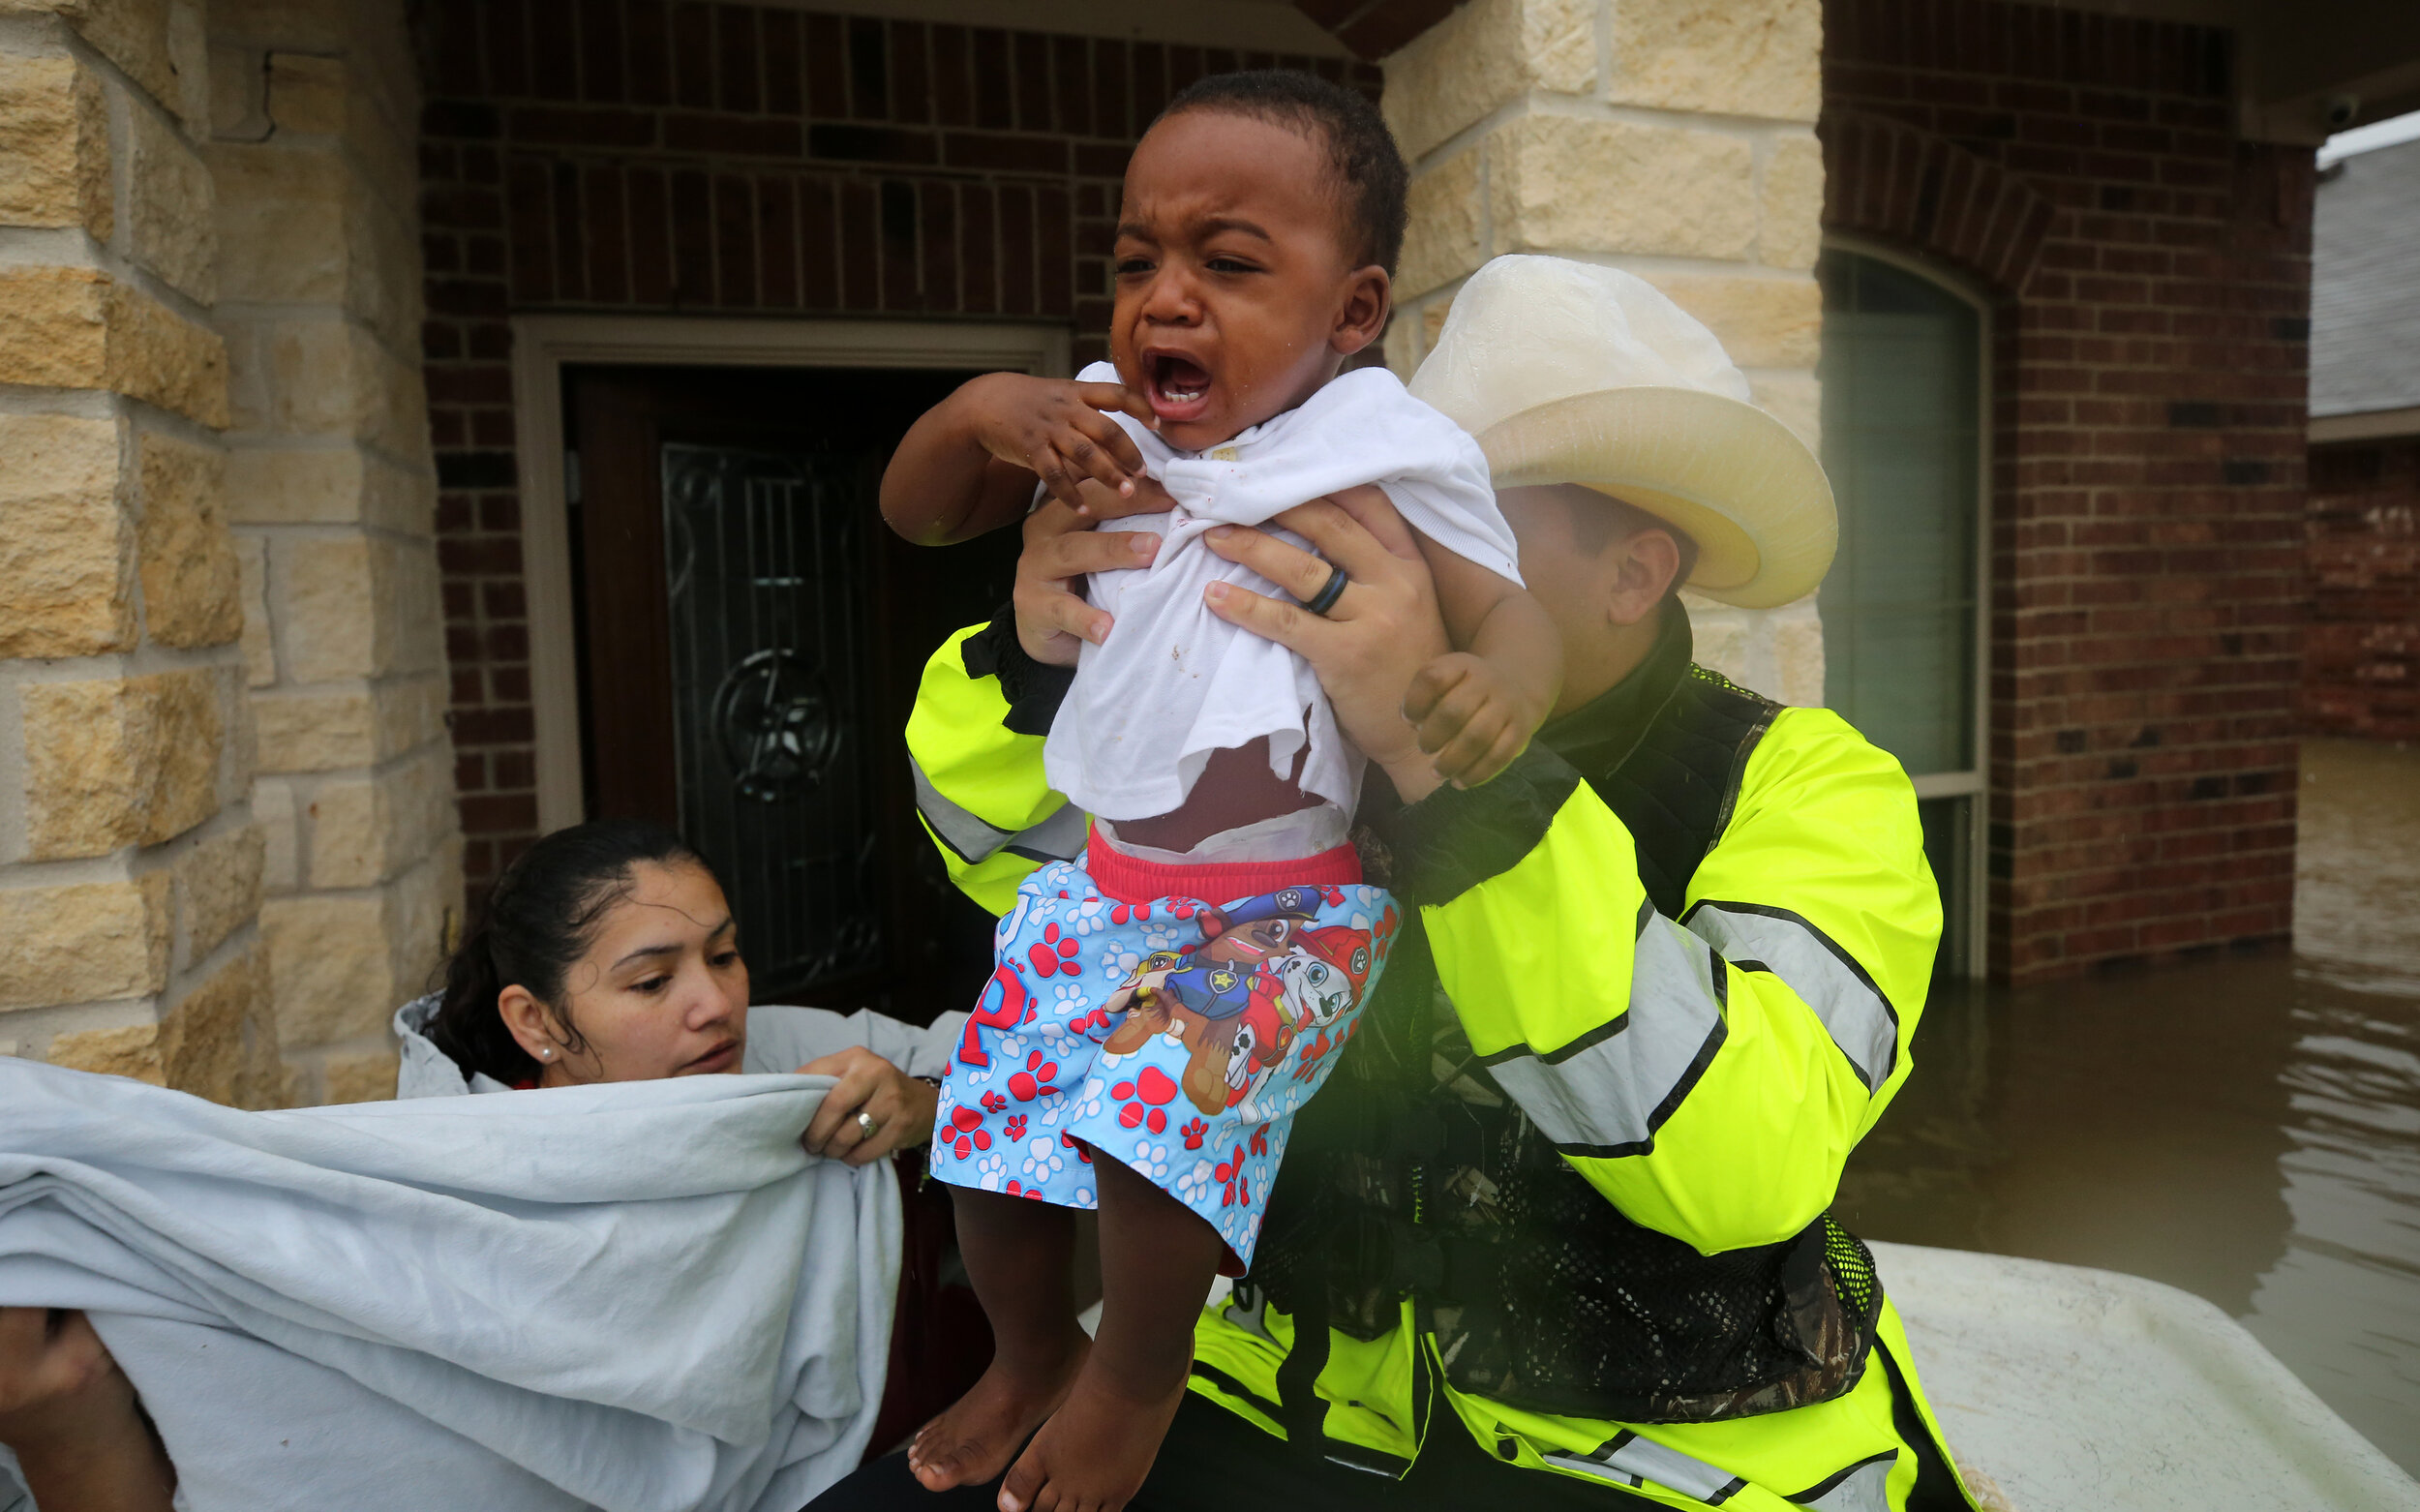  Linda Gonzalez, left, hands one-year-old Joshua Bukes Jr. to Harris County Constable deputy Zach Ryan as they rescued people from flooded homes near Aldine Westfield Road during Hurricane Harvey Monday, Aug. 28, 2017, in Humble, Texas.  